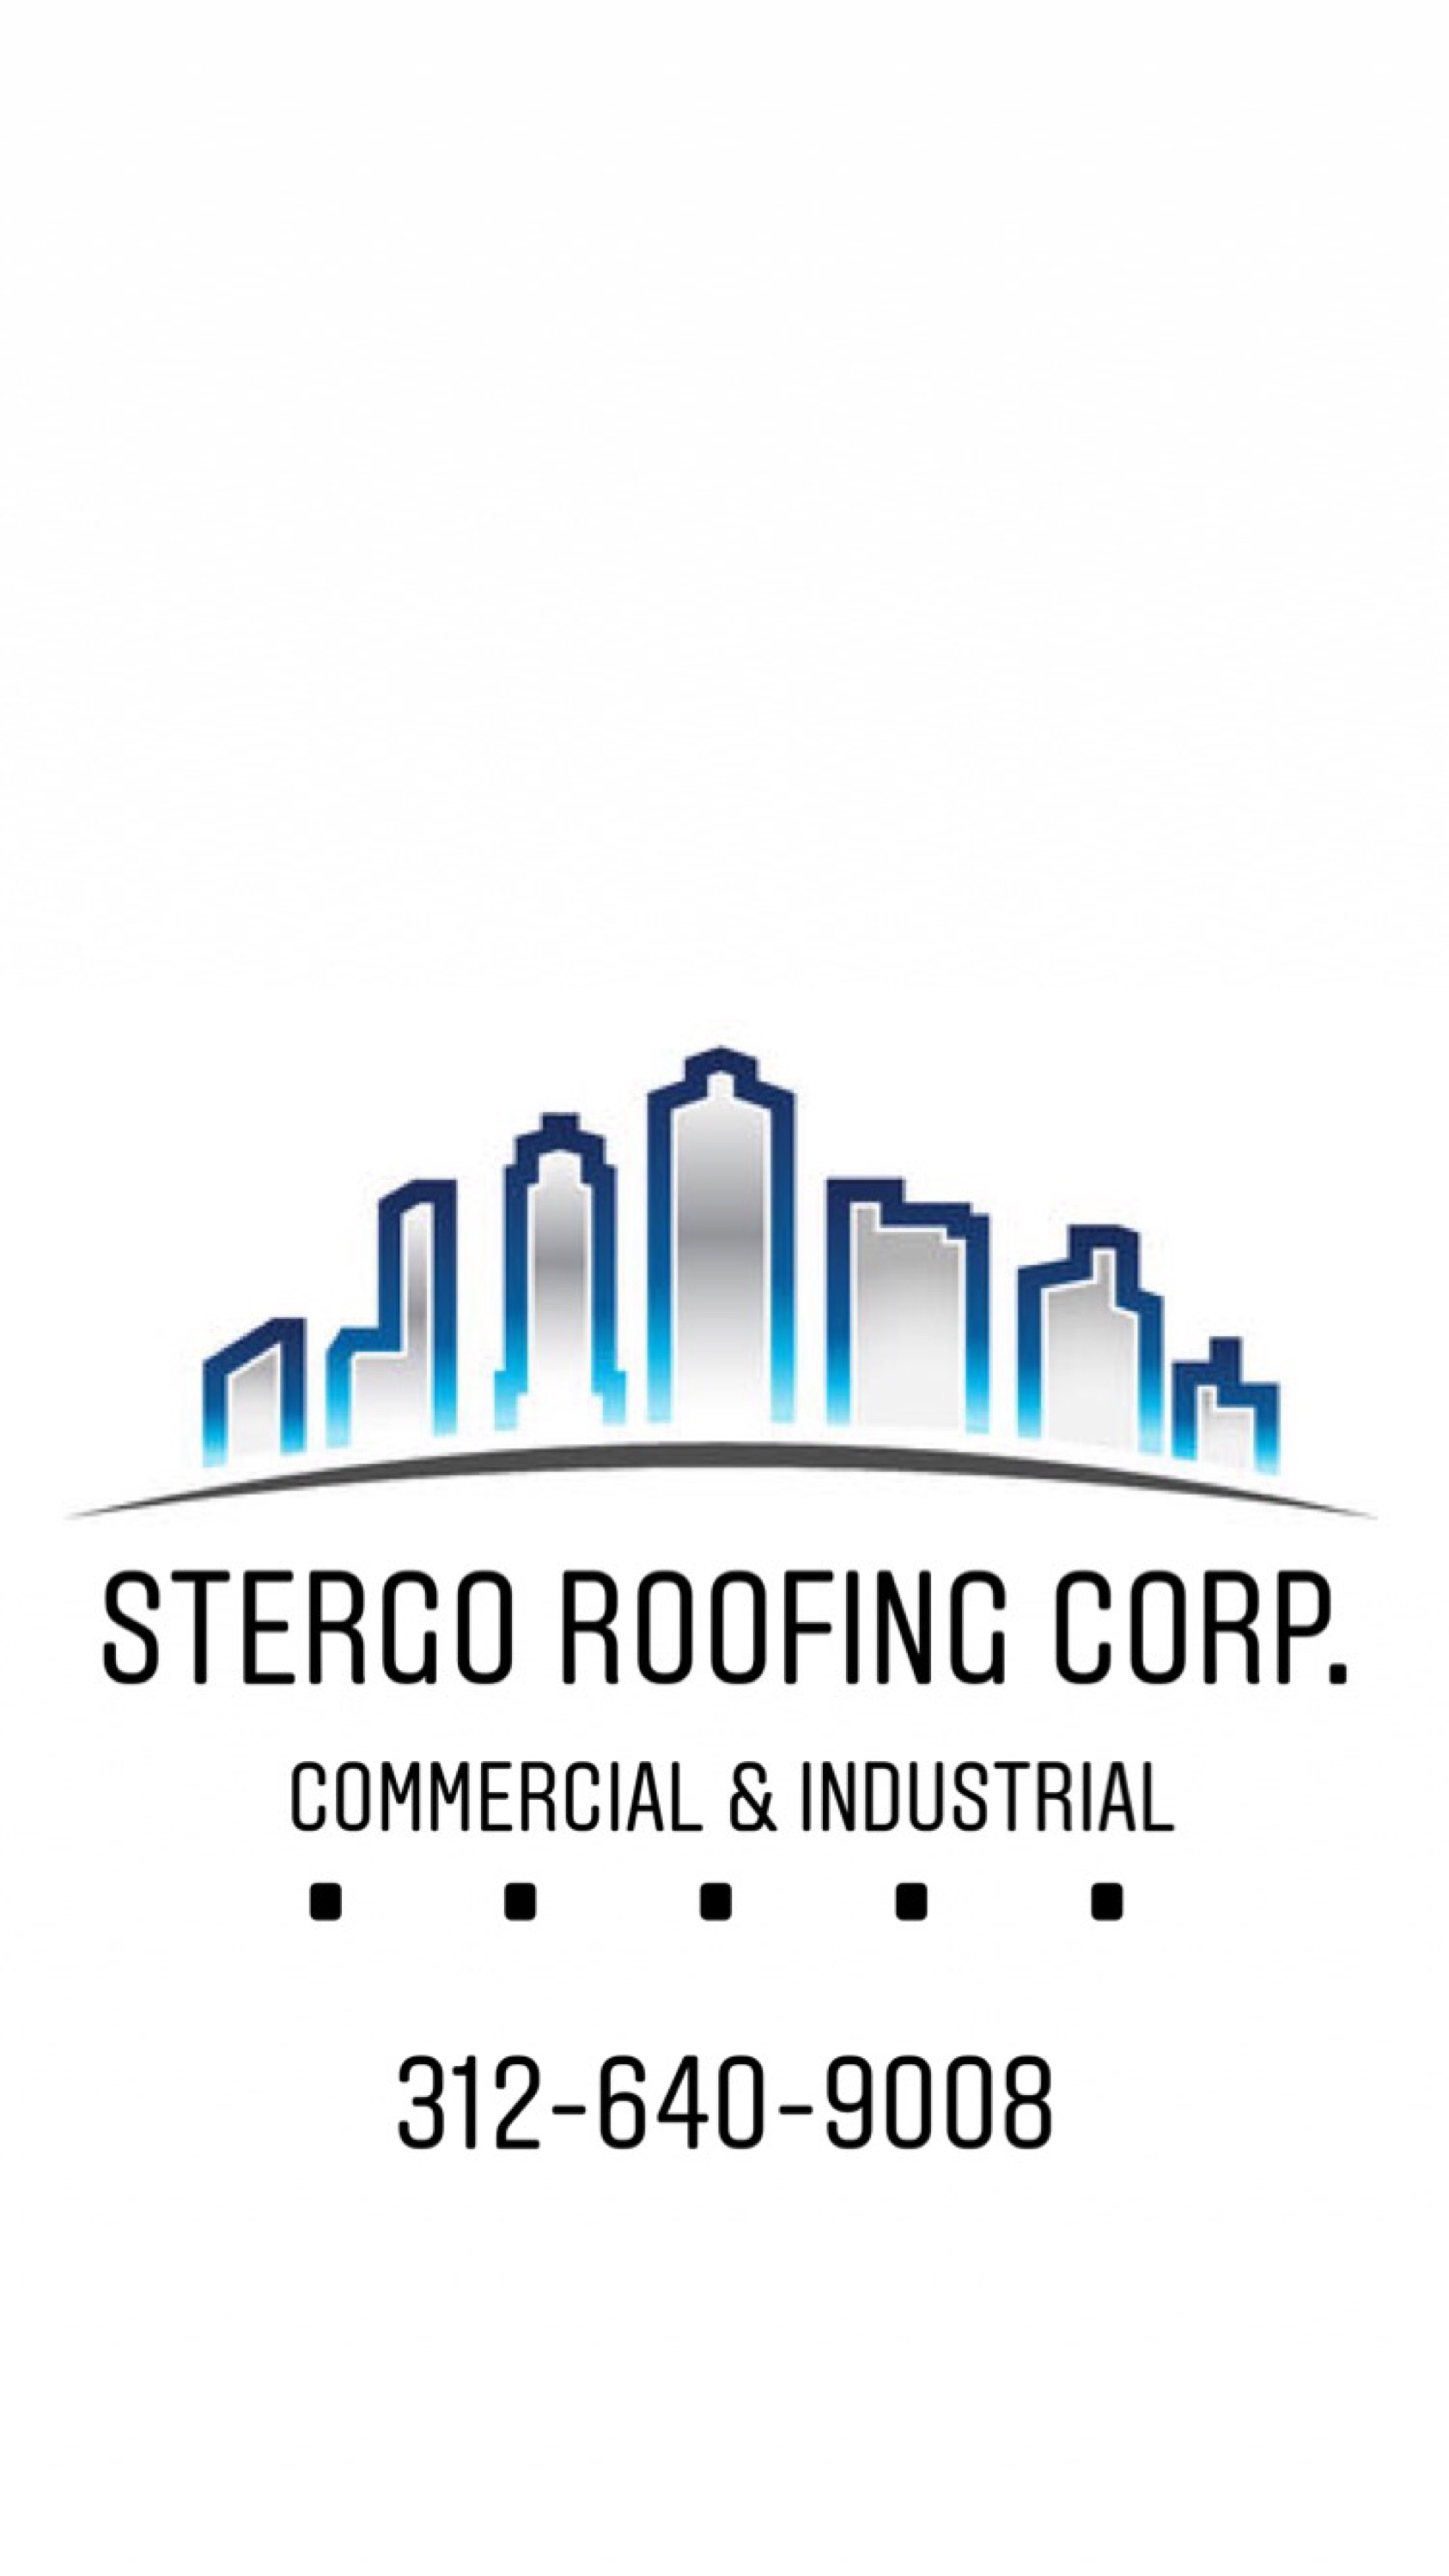 Stergo Roofing Corporation Logo